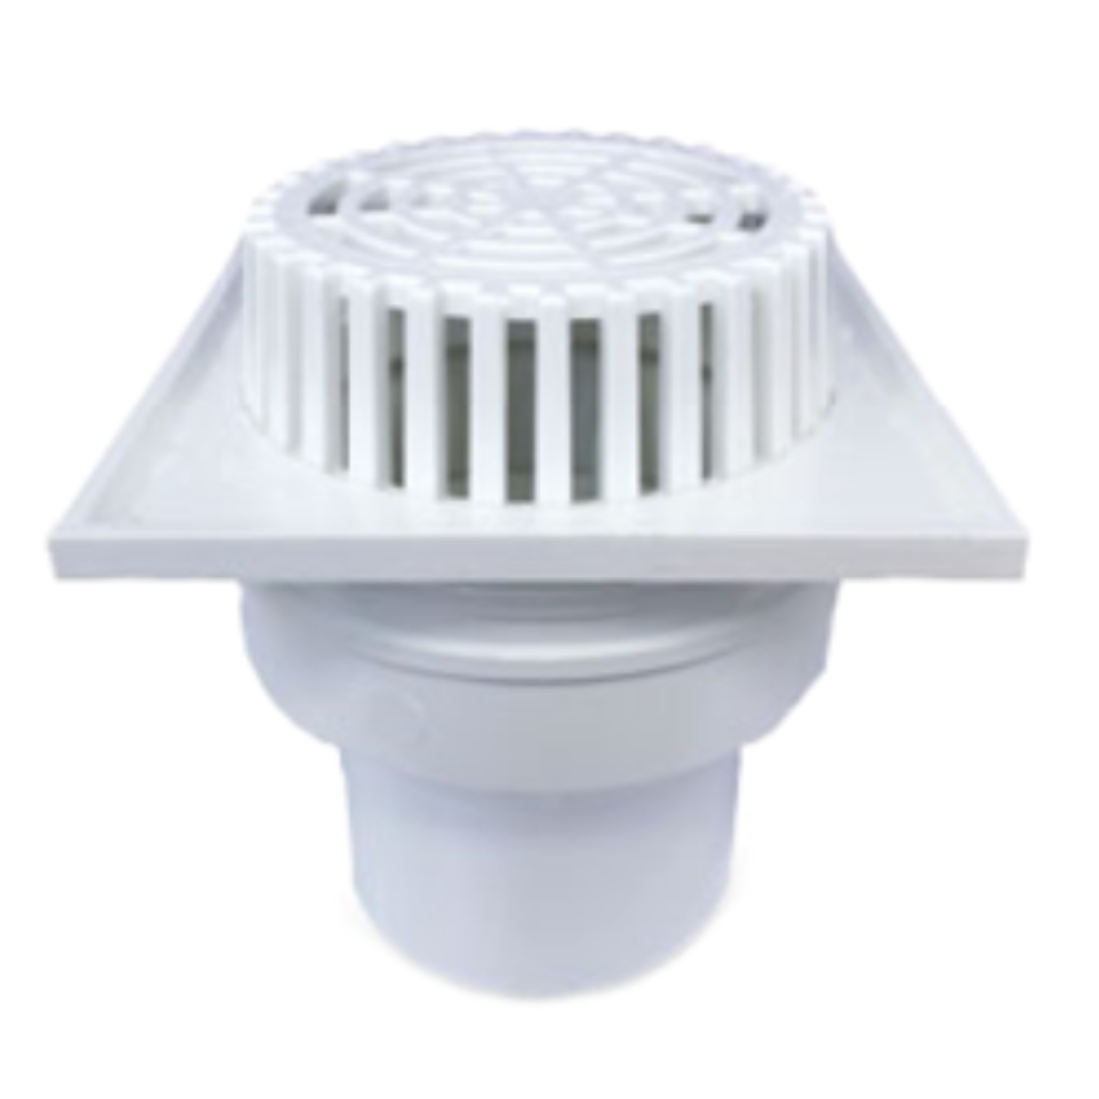 Husky 4"/100MM Dome Balcony Outlet With Square Base 08-BOD4SB213